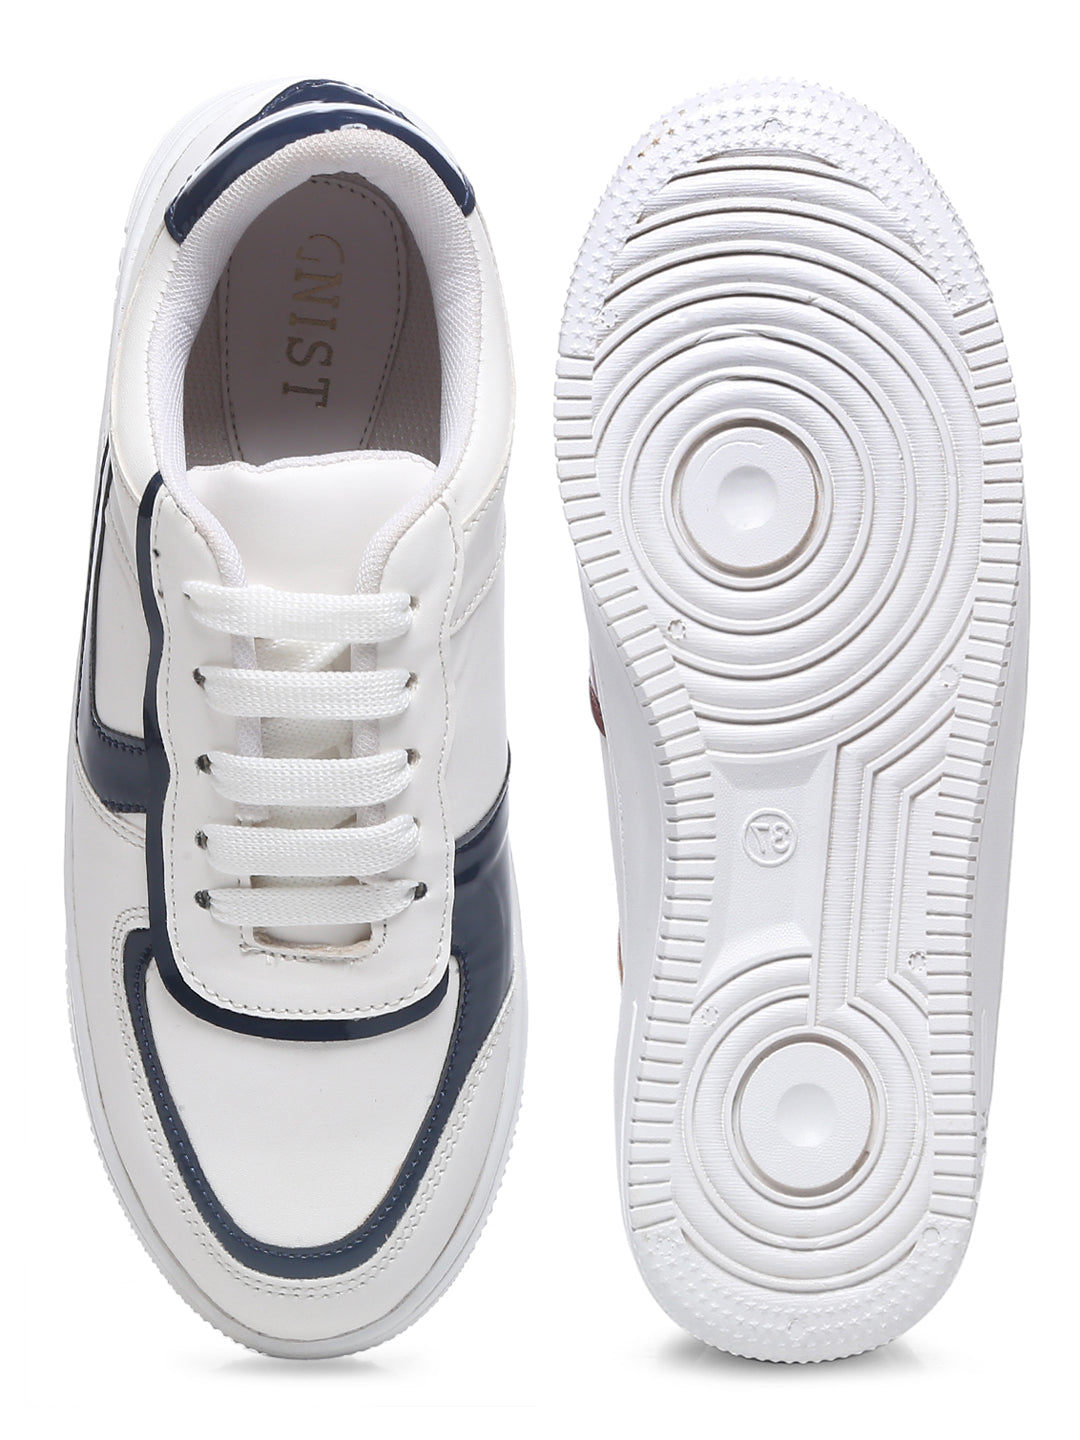 GNIST White Navy Colour Blocked Sneakers